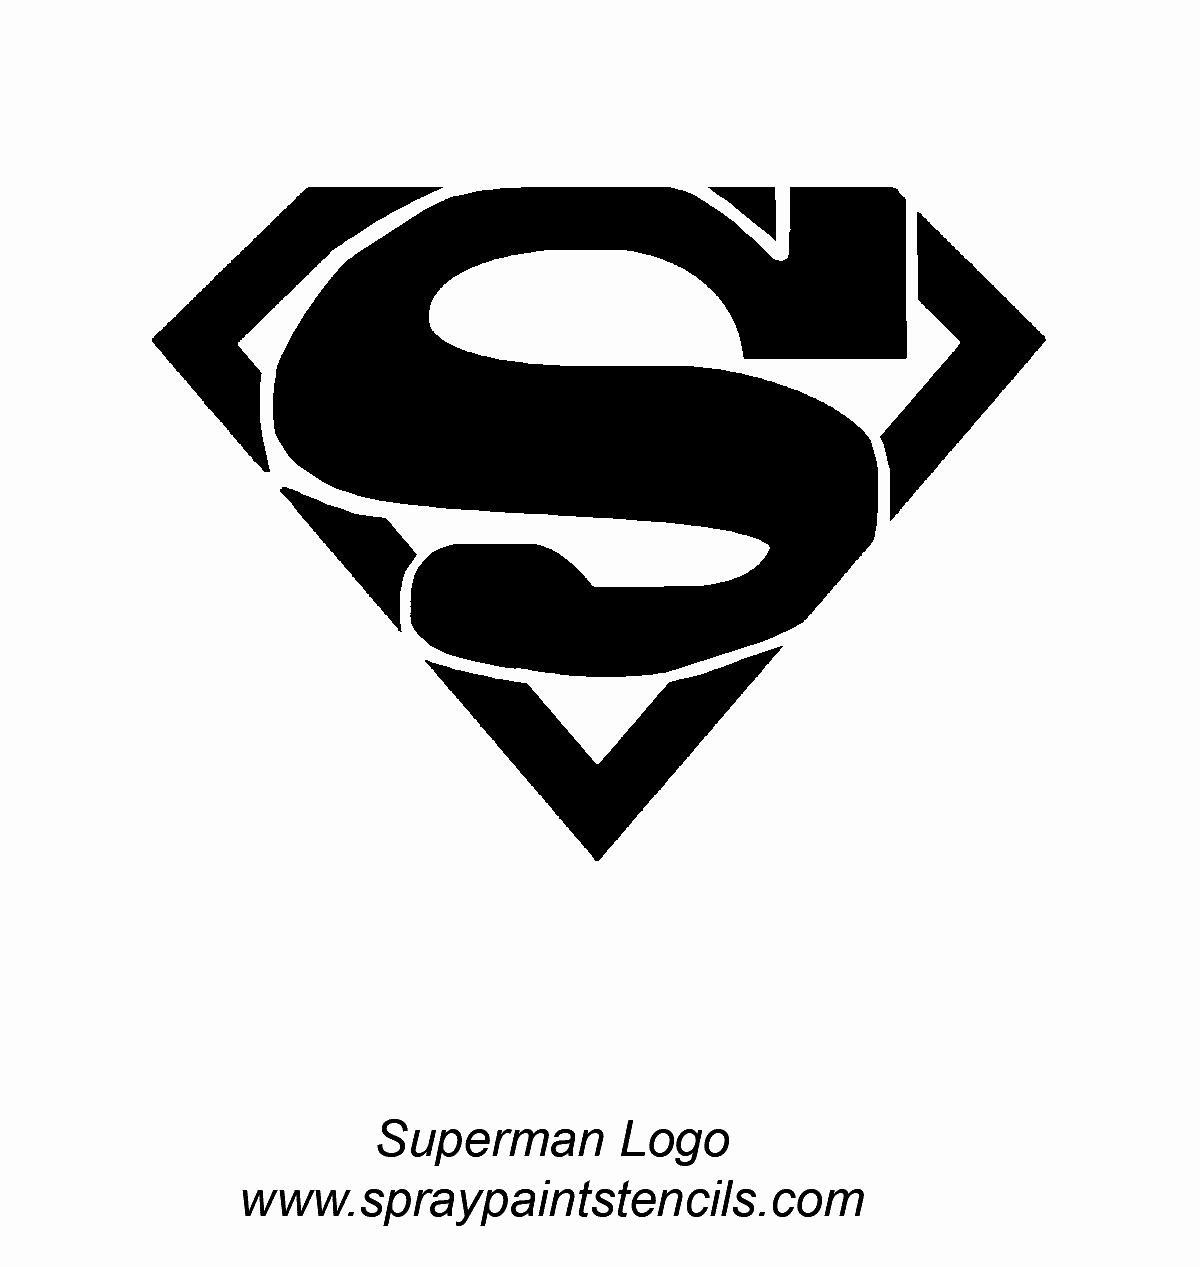 Superman Logo Stencil Lovely Stencil Requests for November 2007